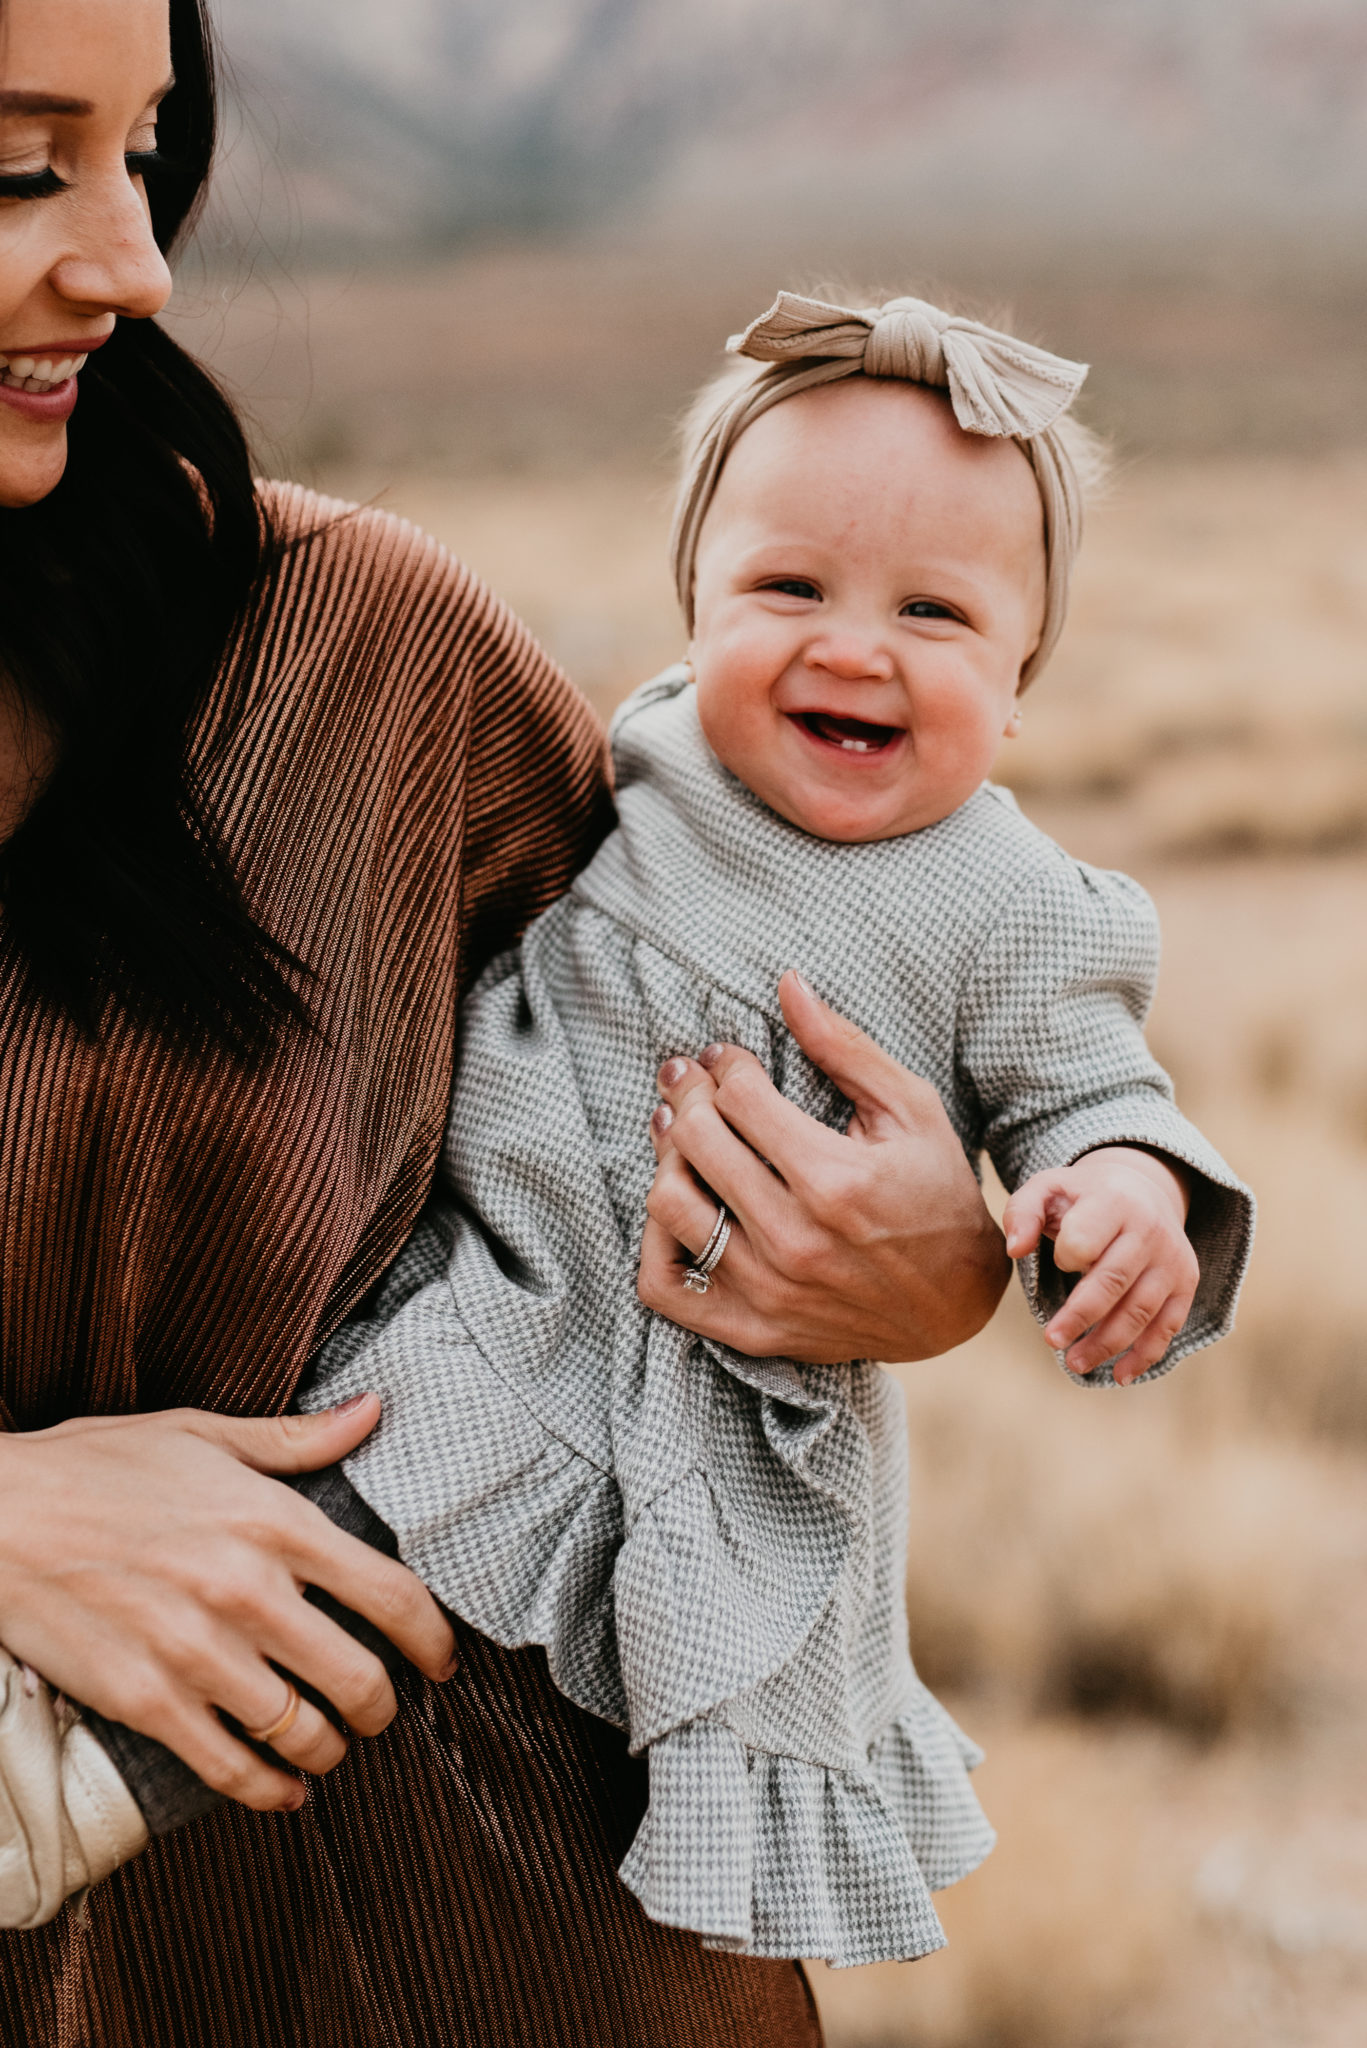 Our Holiday Family Pictures featured by top Las Vegas lifestyle blog, Outfits & Outings: image of a mom holding her baby daughter